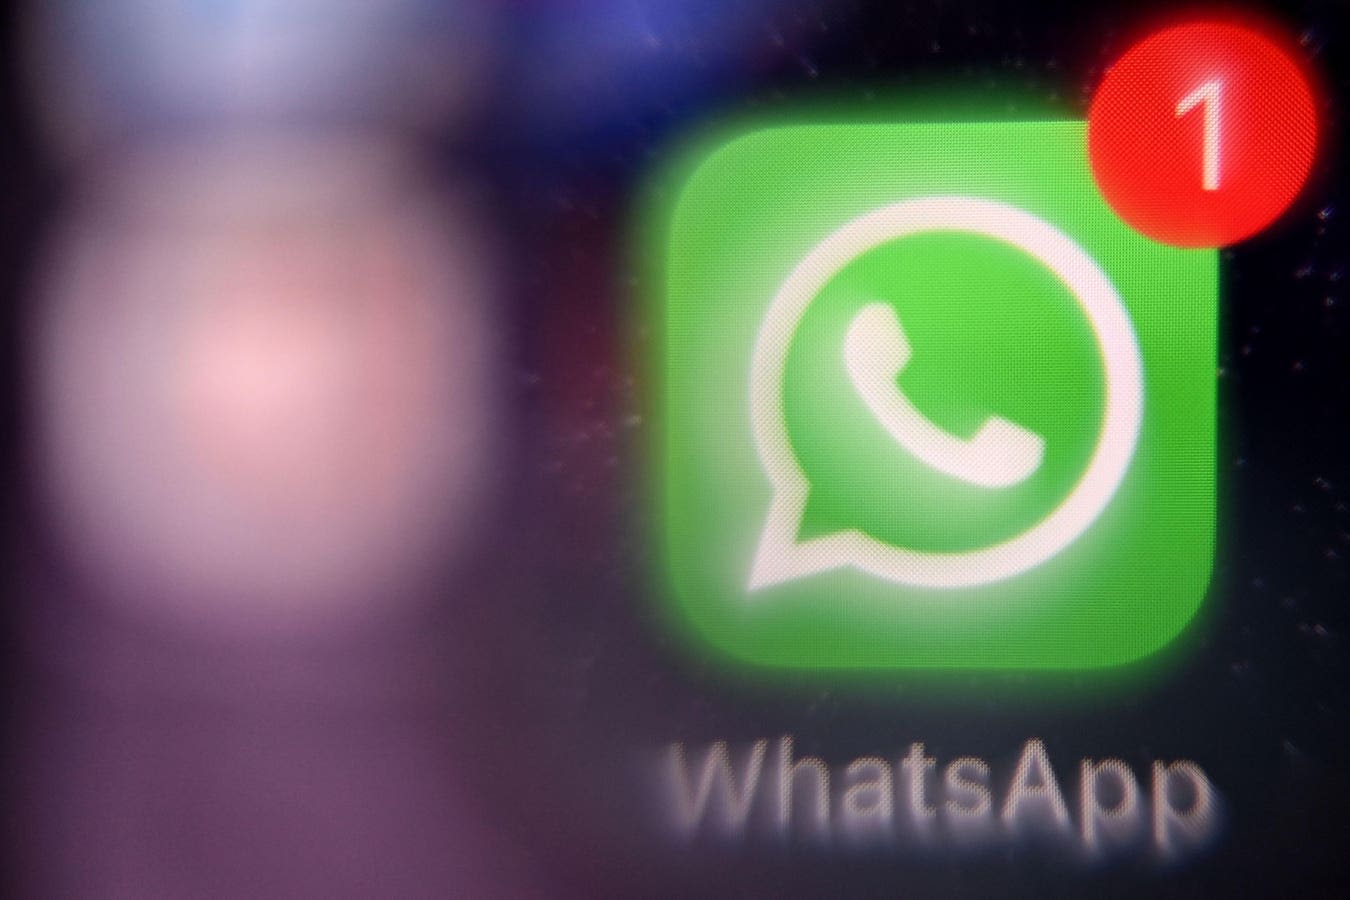 WhatsApp Brand New iPhone Feature Just Launched That’s Much Easier To Use